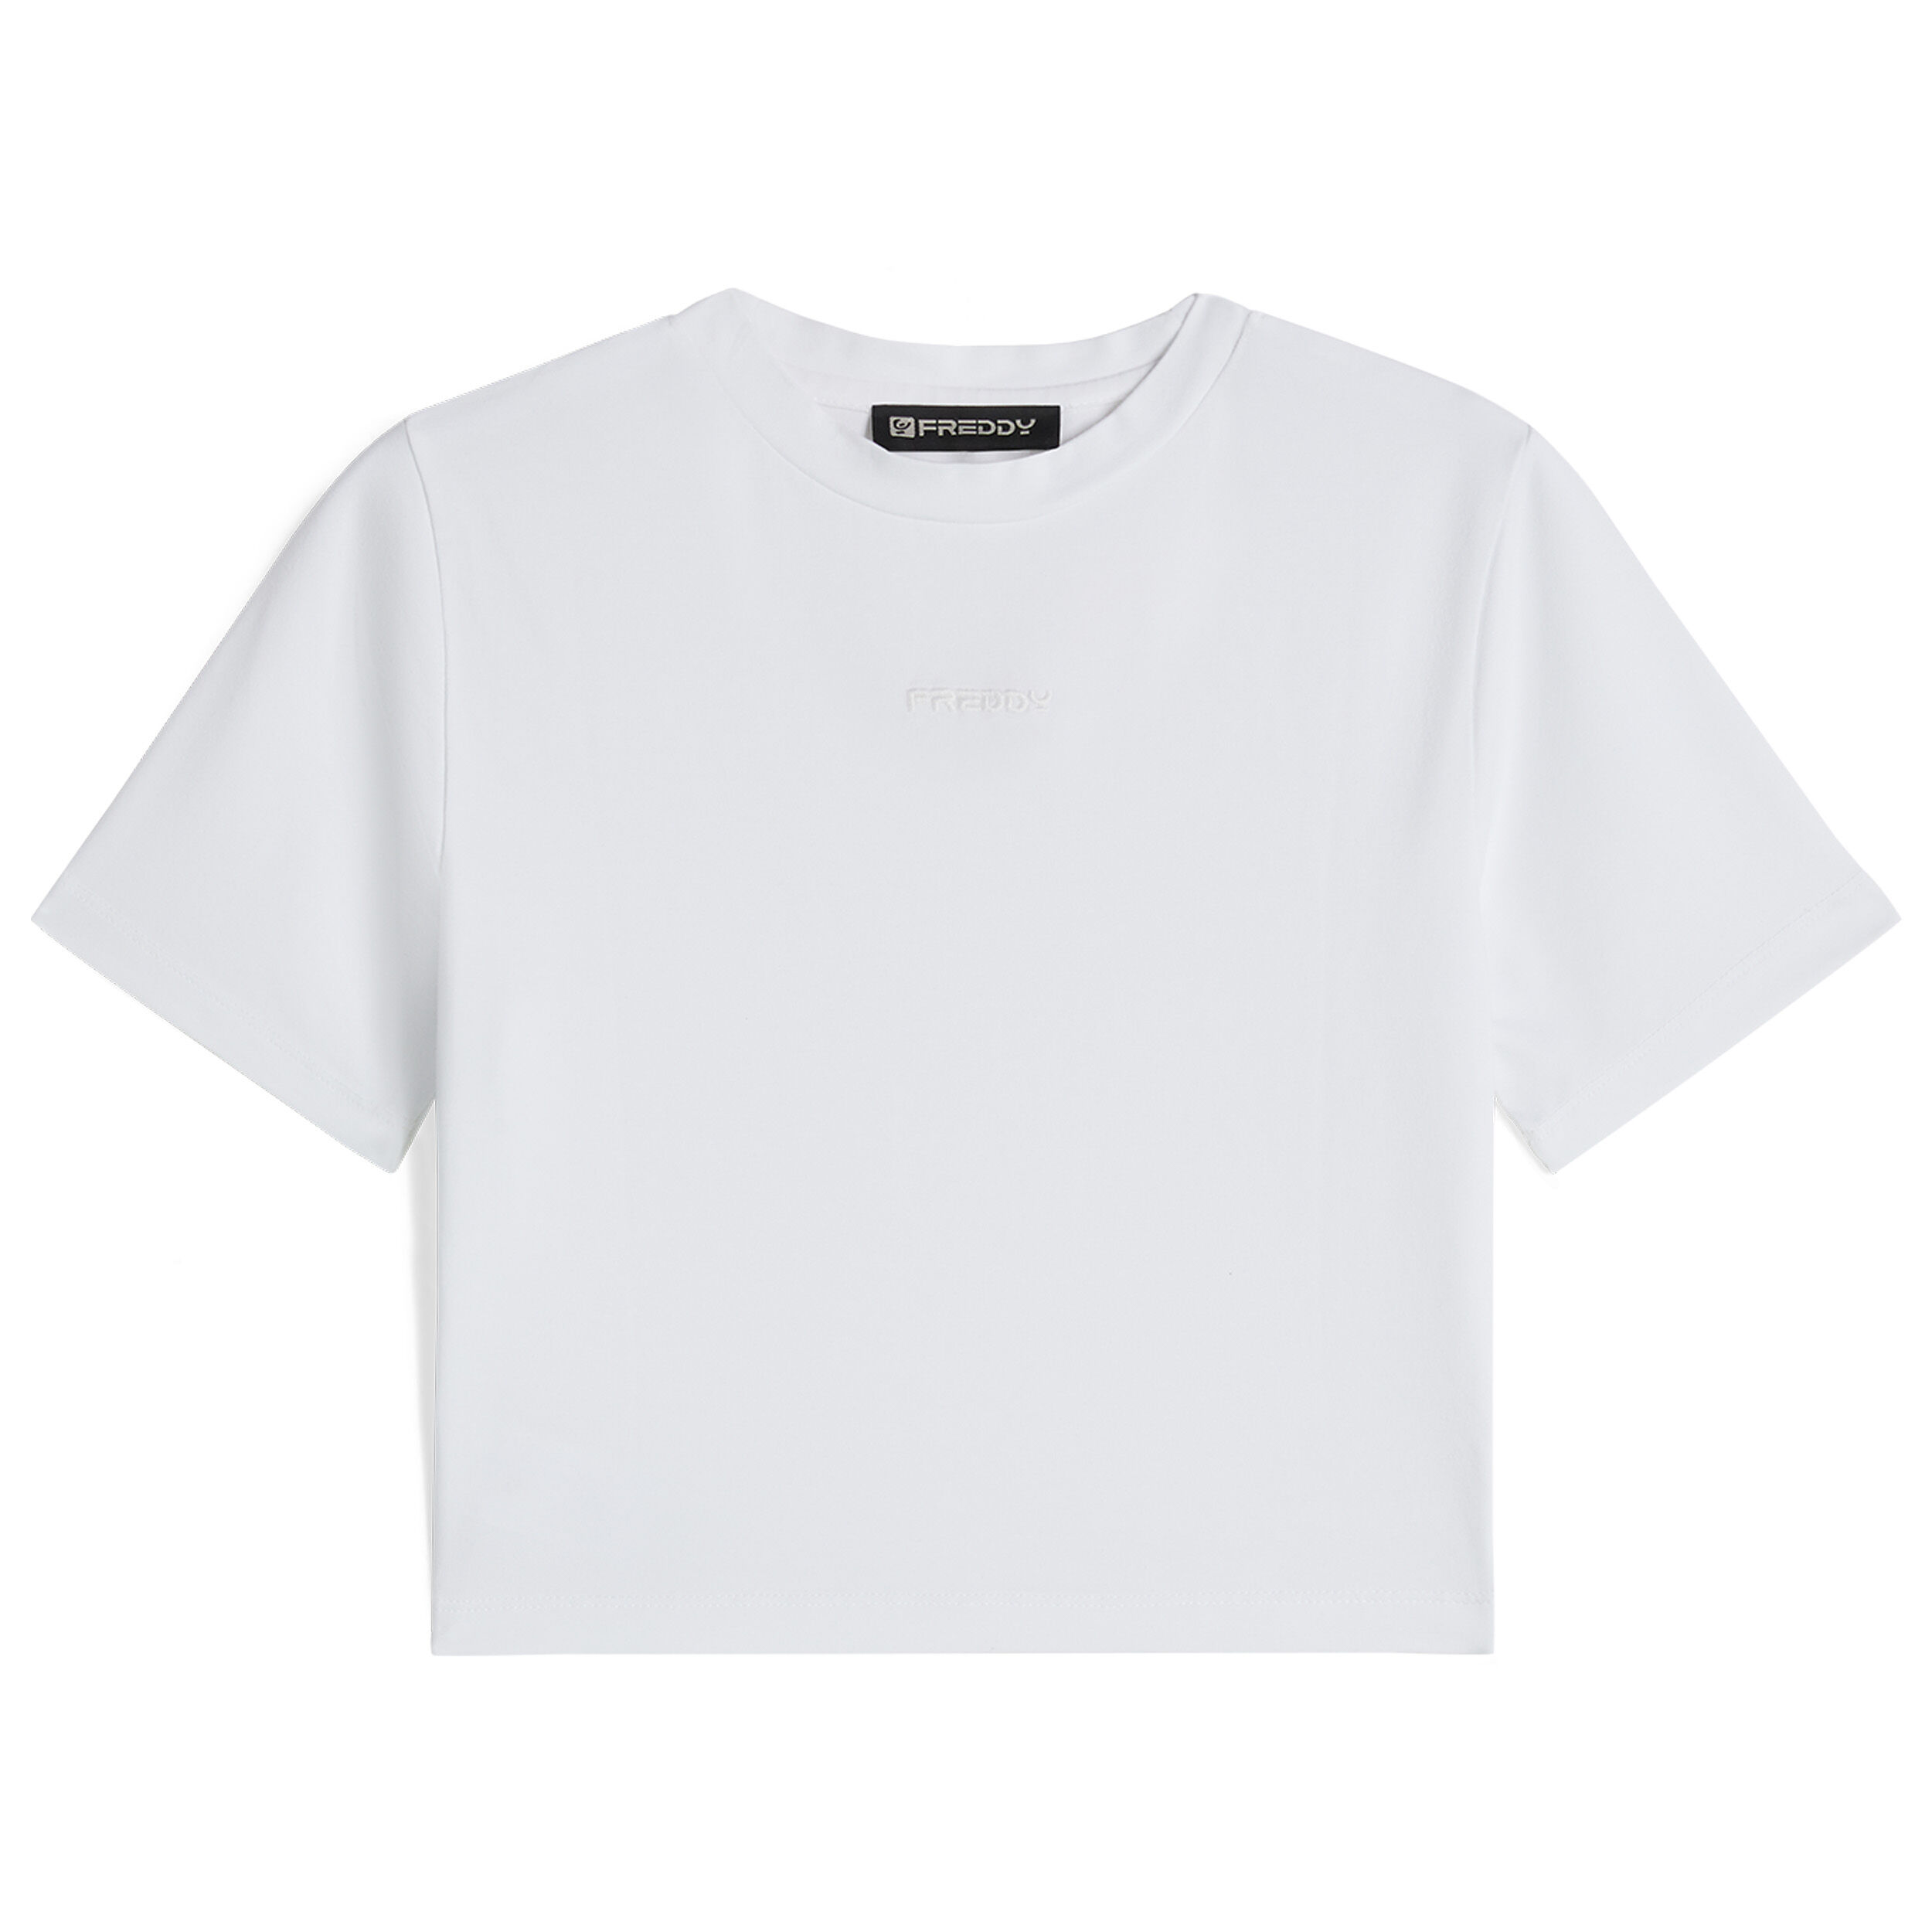 Freddy T-shirt slim fit corta in tessuto jersey tinto capo Bianco Direct Dyed Donna Medium